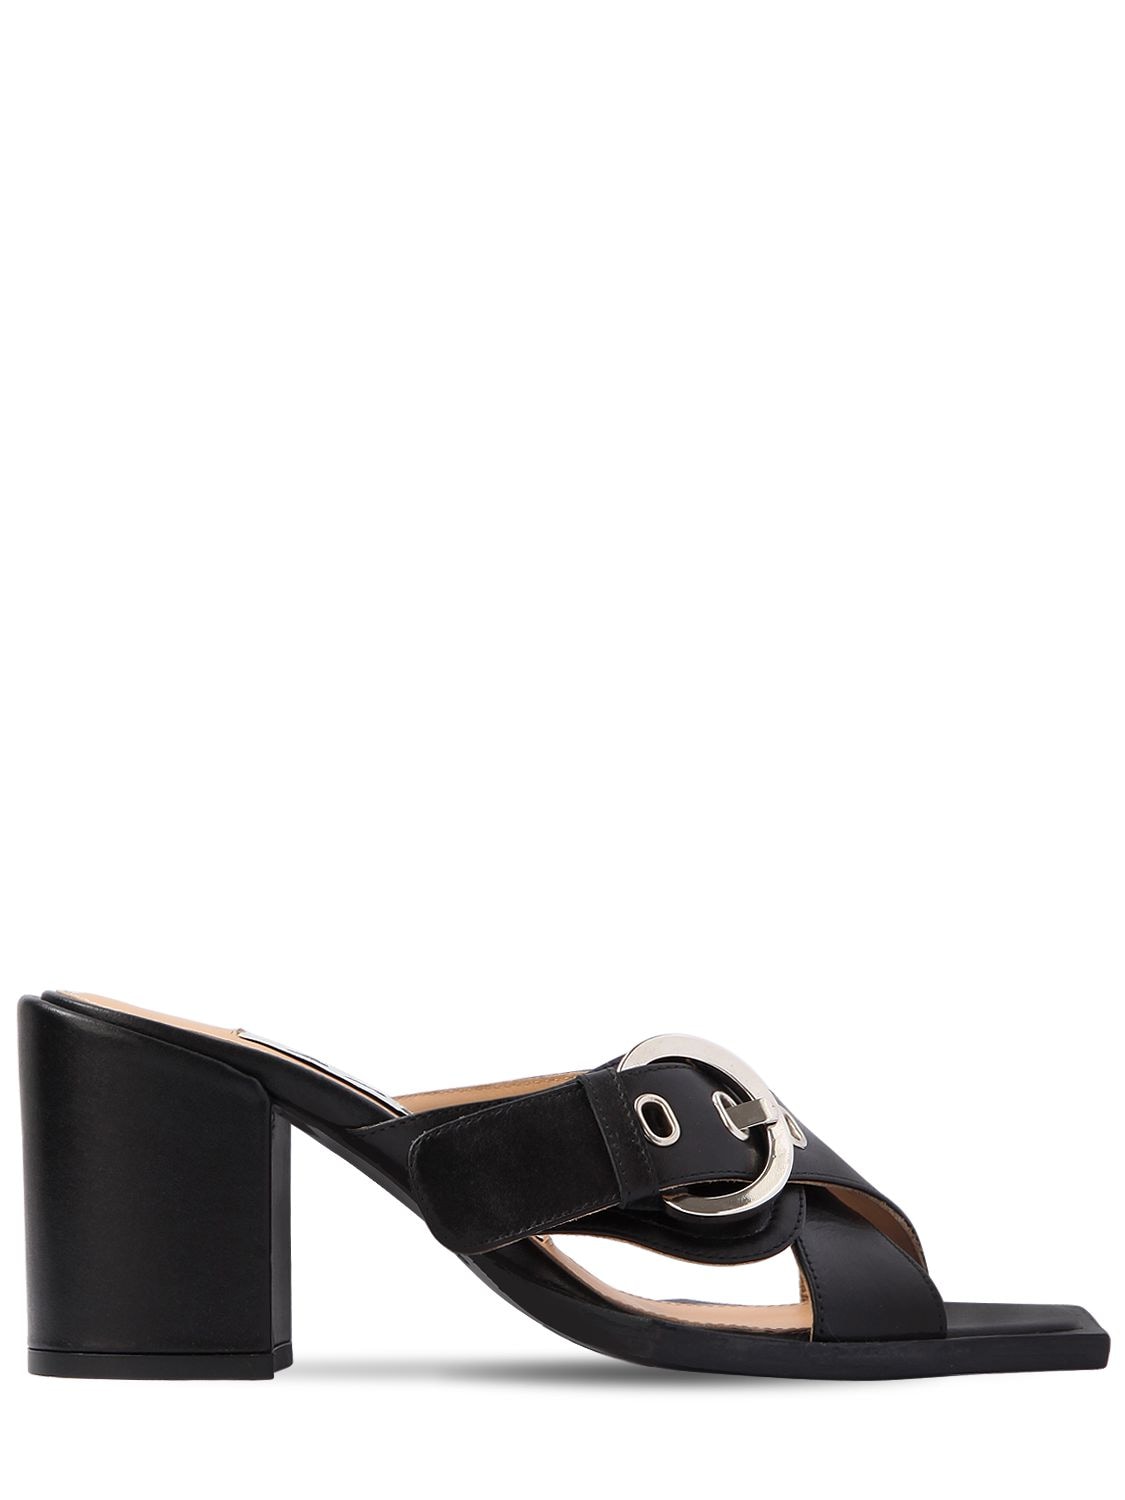 AALTO 80MM CHUNKY LEATHER SANDALS